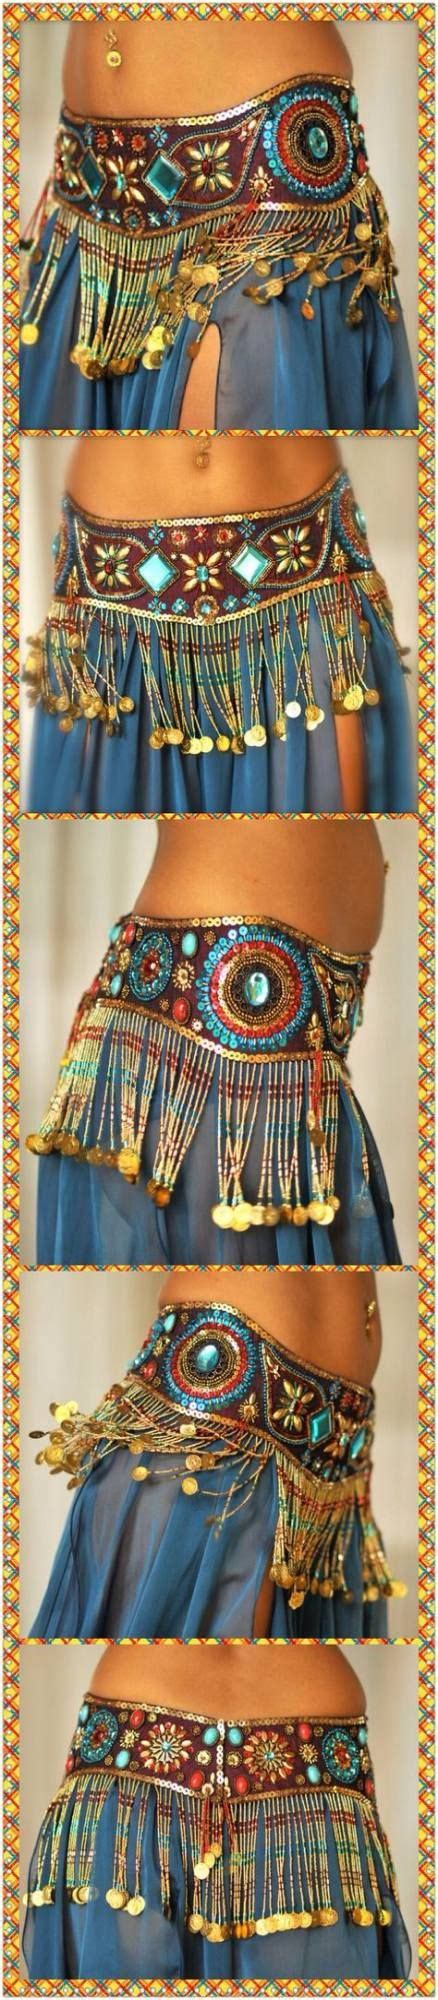 The perfect belly dancing costume can help to take your dance to the next level! New Belly Dancing Costumes Diy Ideas Ideas #diy #dancing | Belly dance, Tribal belly dance ...